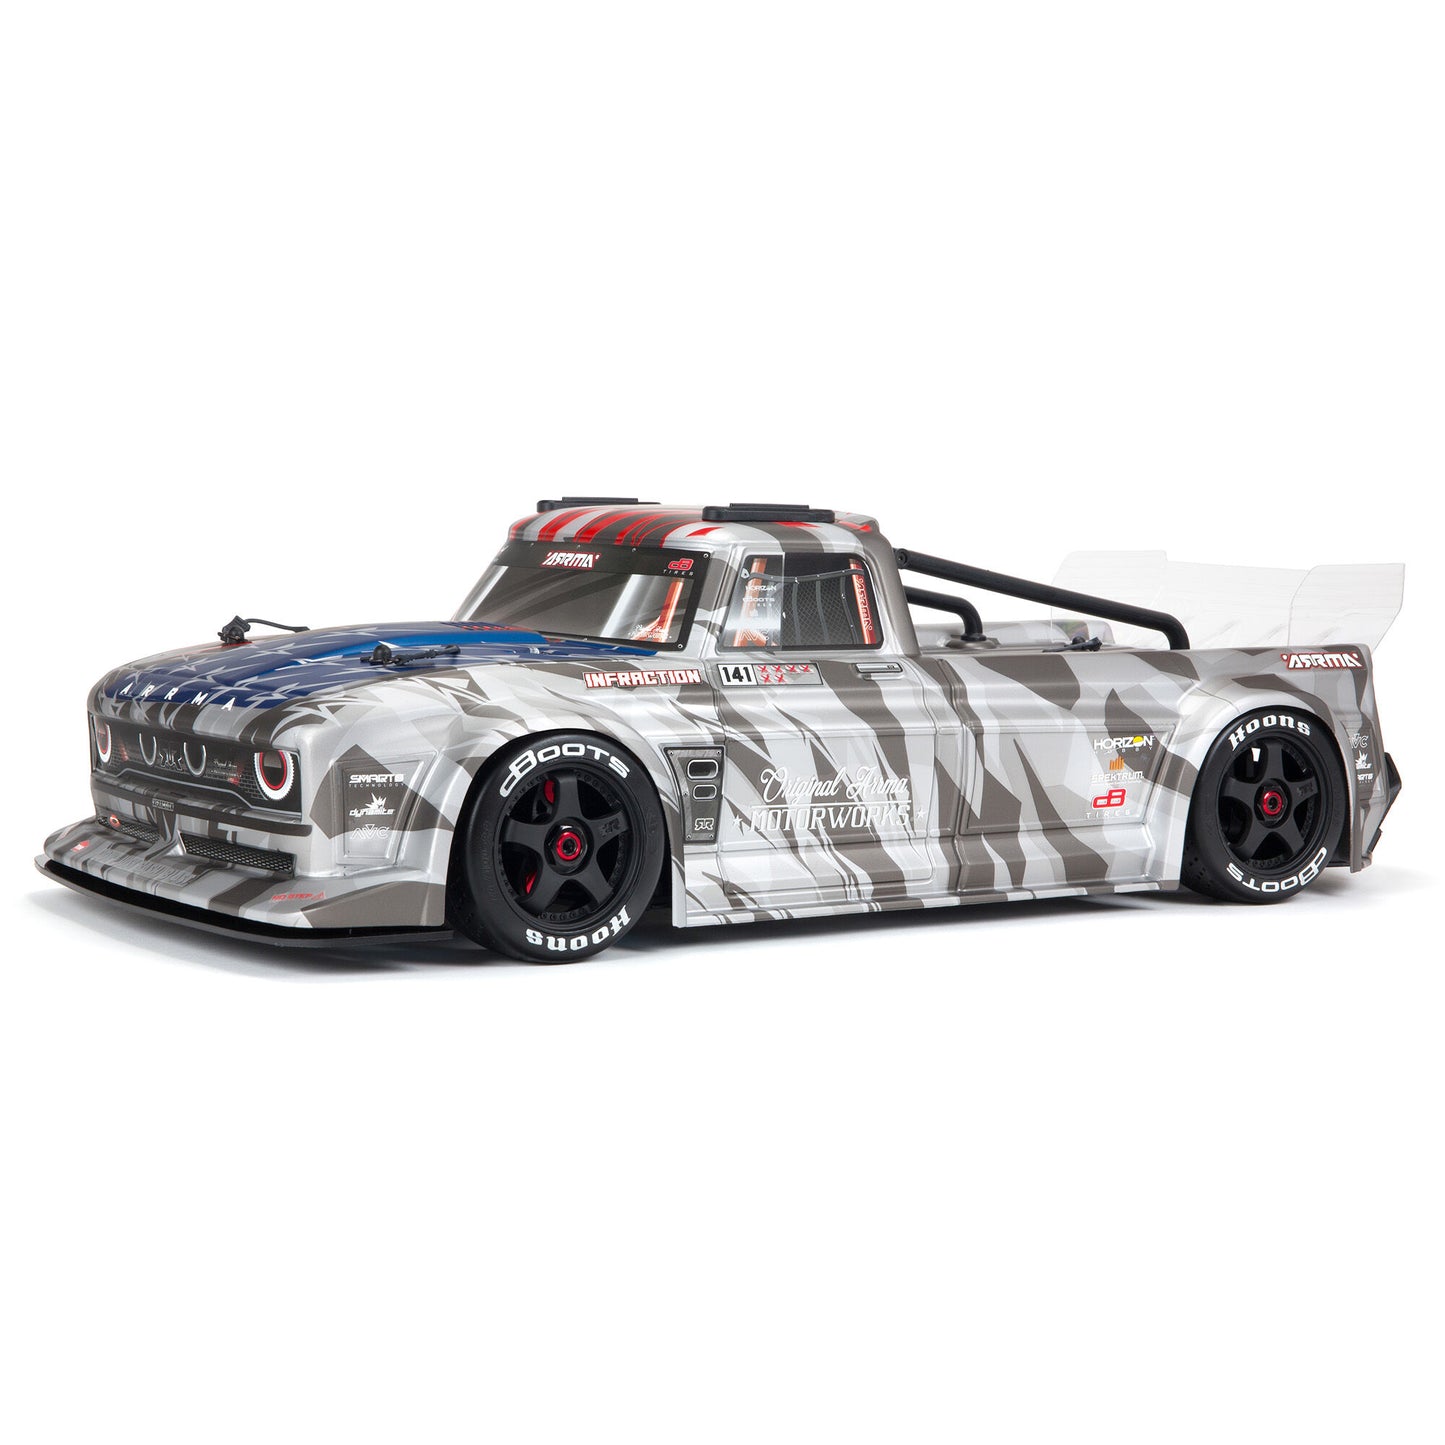 1/7 INFRACTION 6S BLX All-Road Truck RTR, Silver